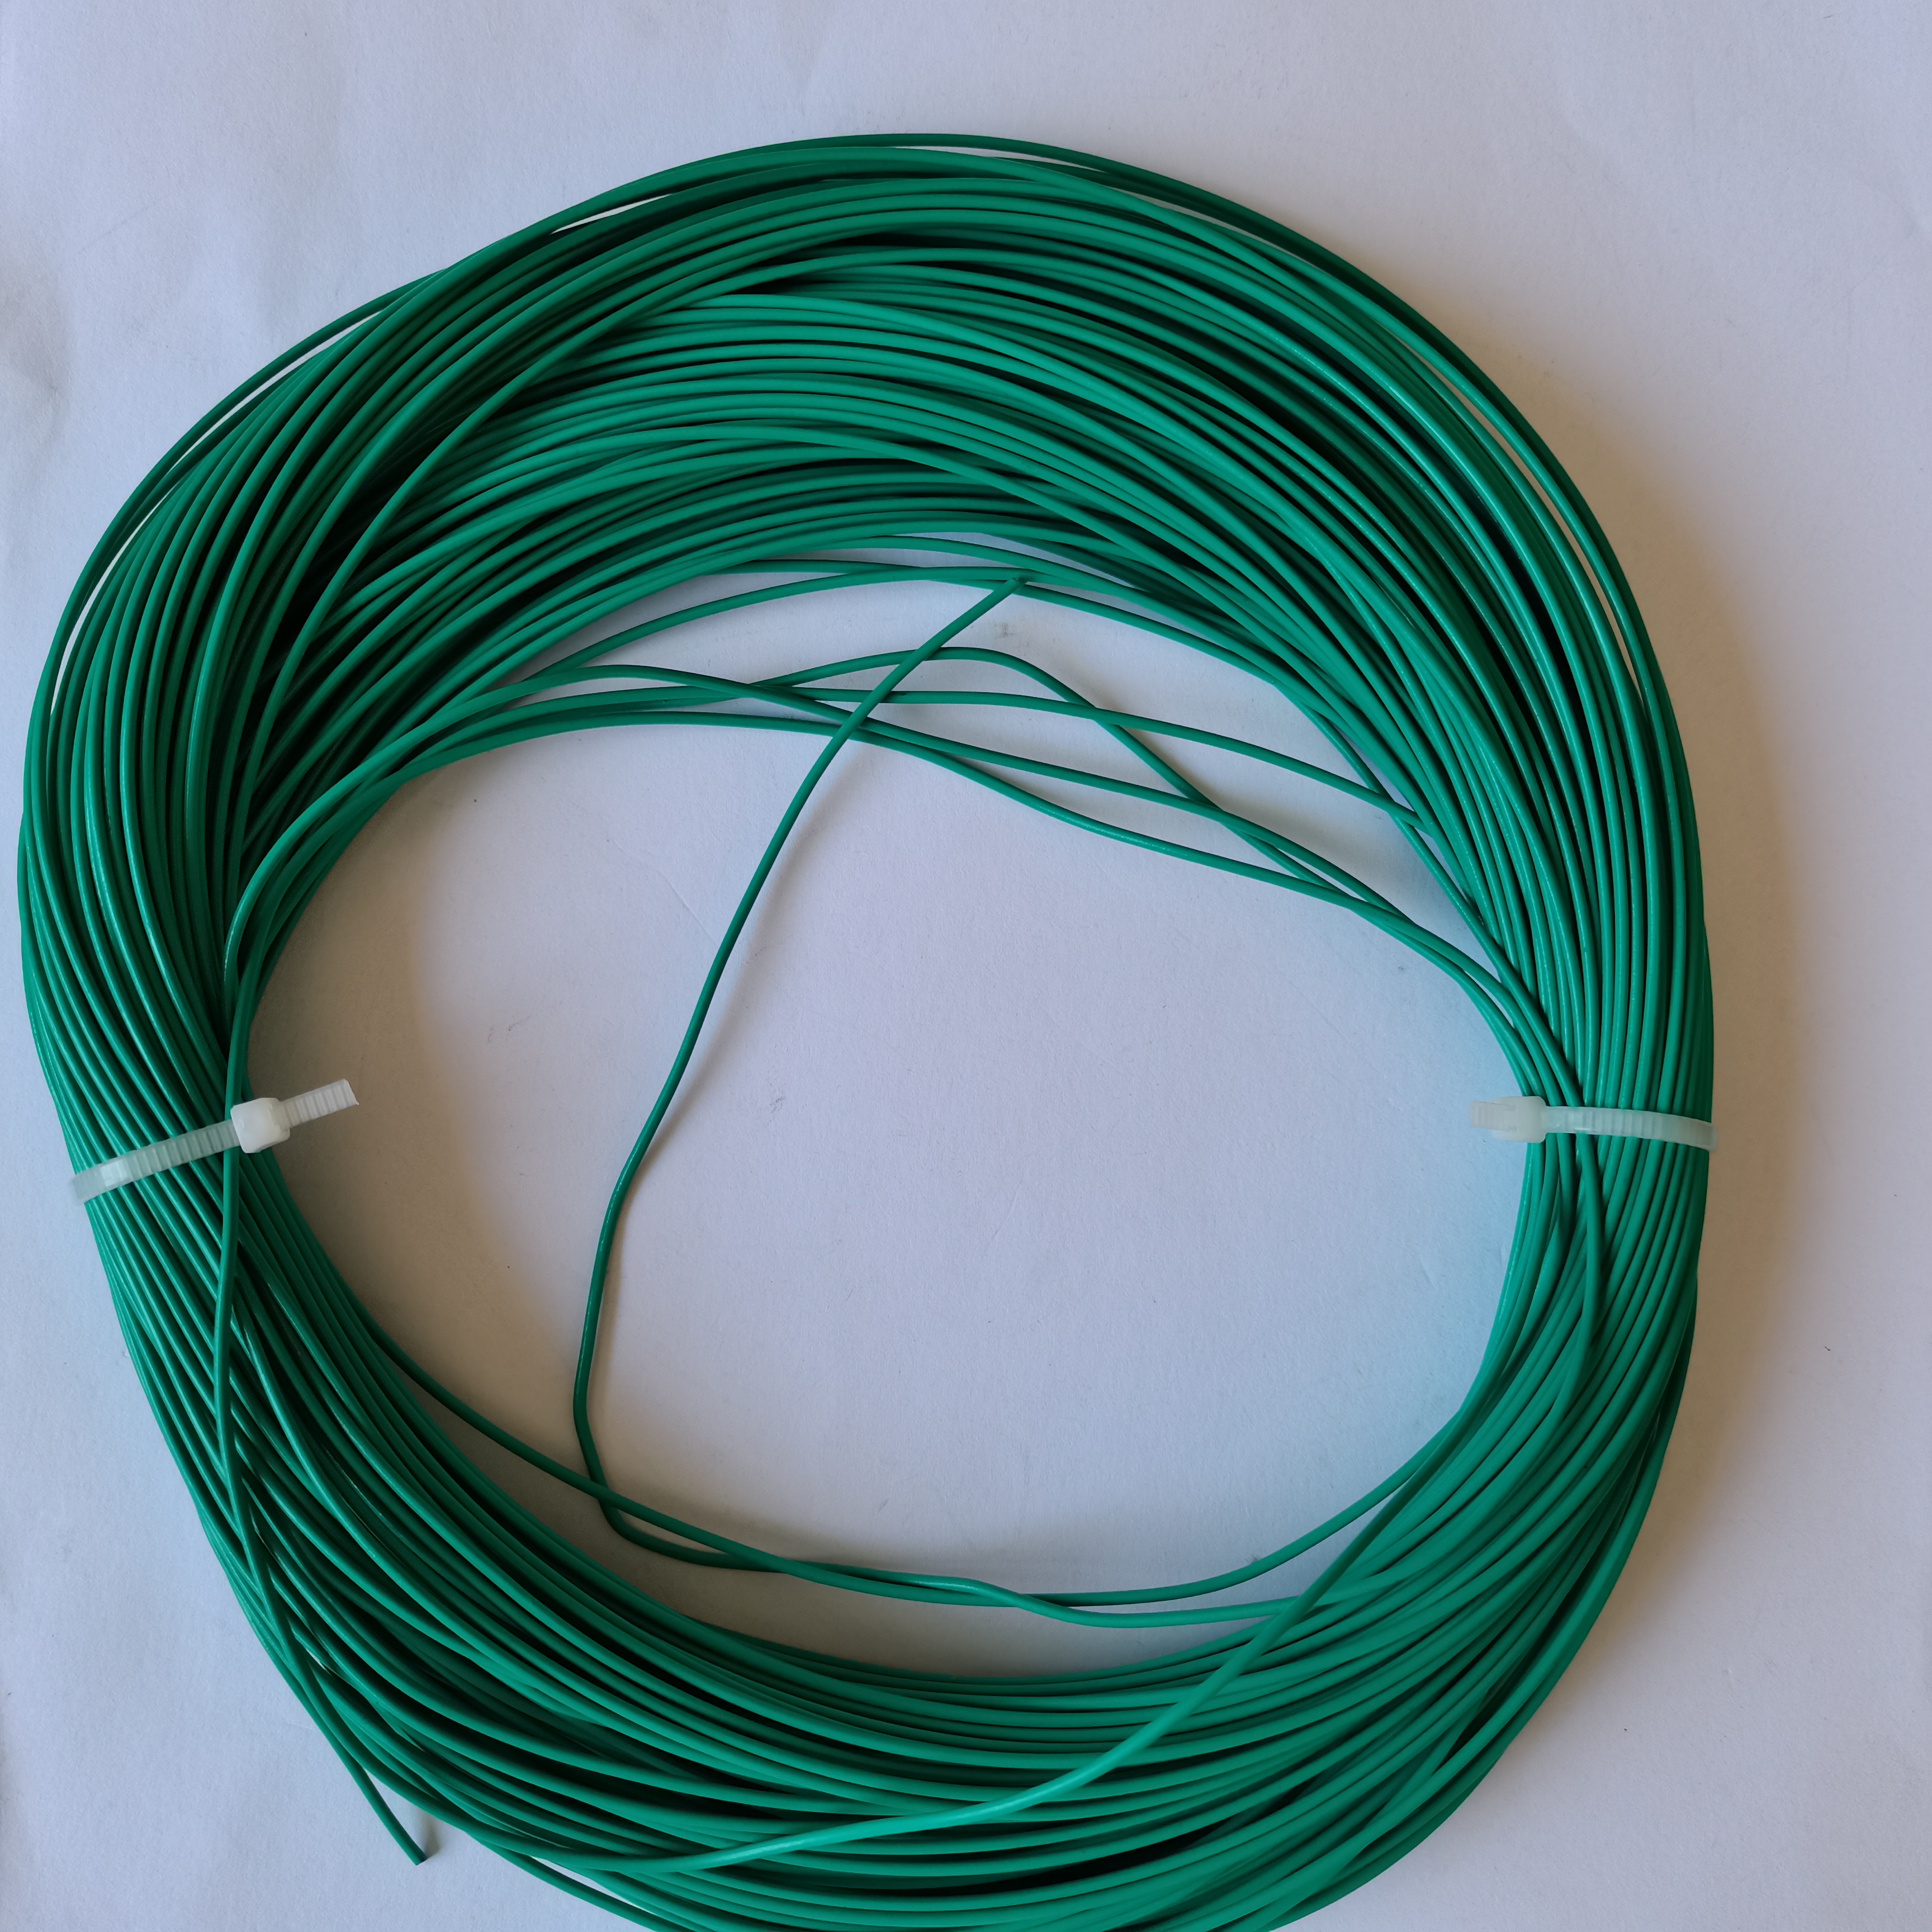 Special Motor Winding Cable,special lighting motor wire cable, Pump Cables,Motor Winding Cables